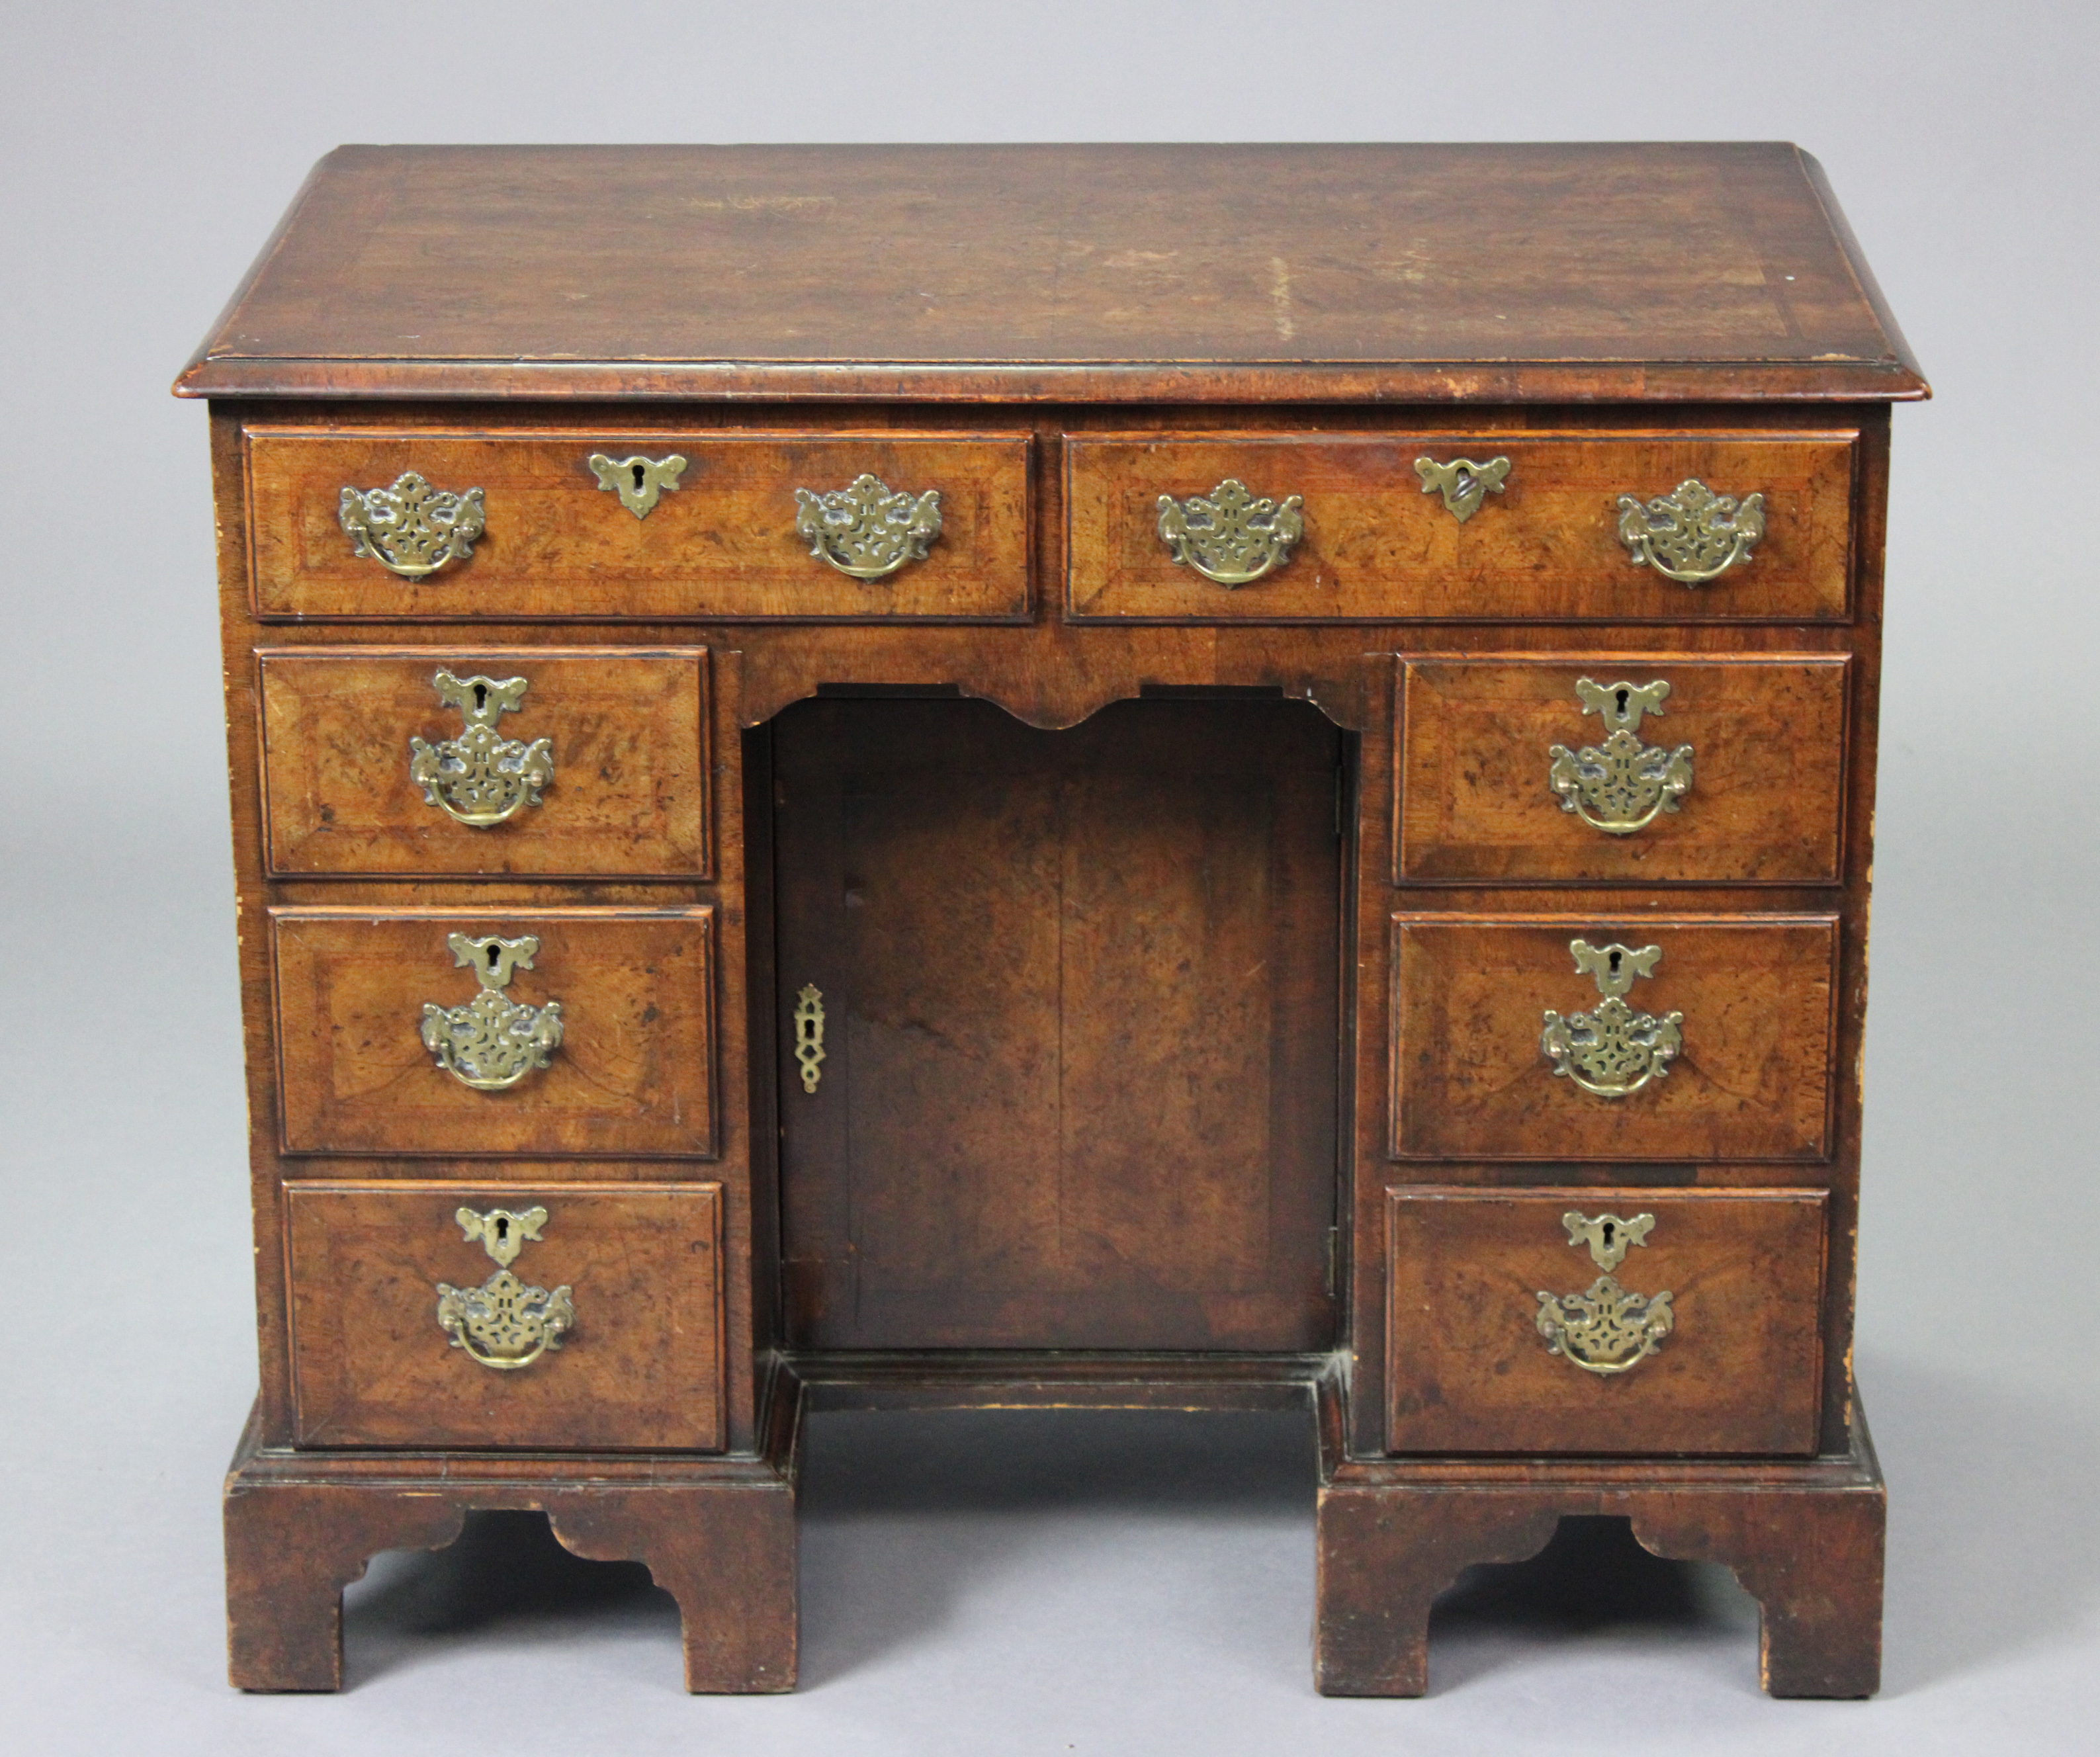 A Georgian walnut knee-hole desk with crossbanding & herring-bone inlay, fitted with an